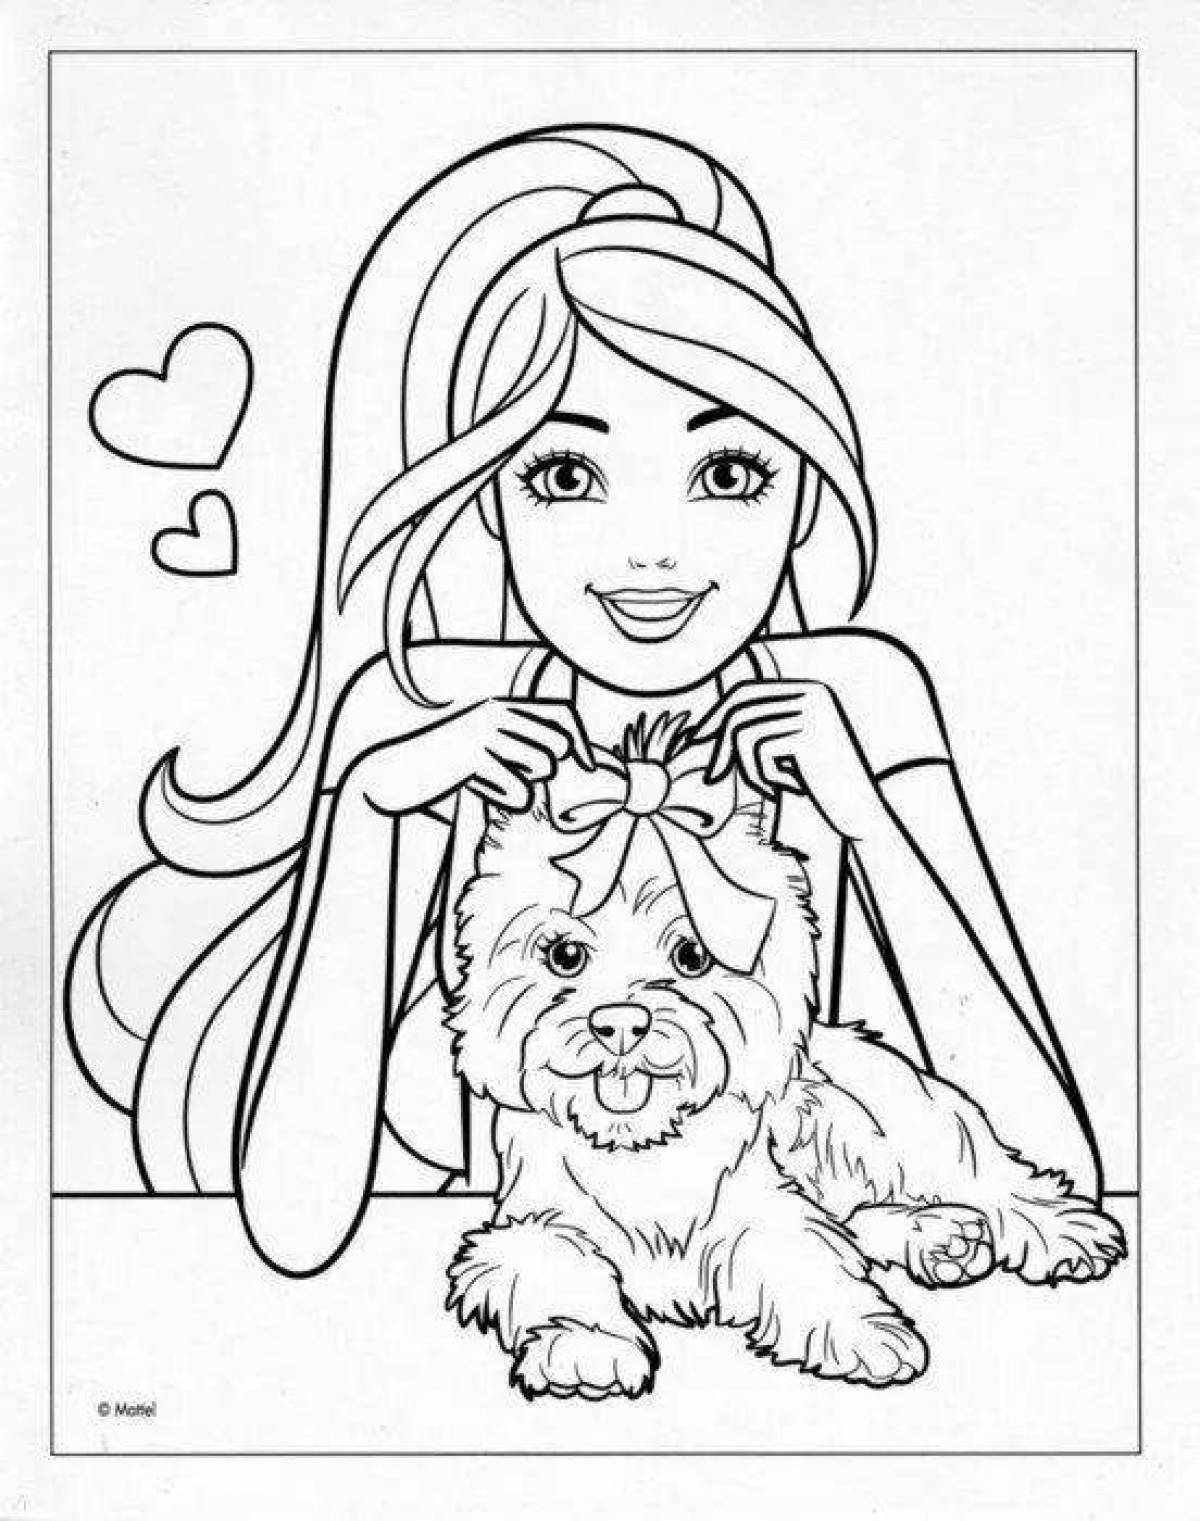 Amazing coloring book girl with a dog